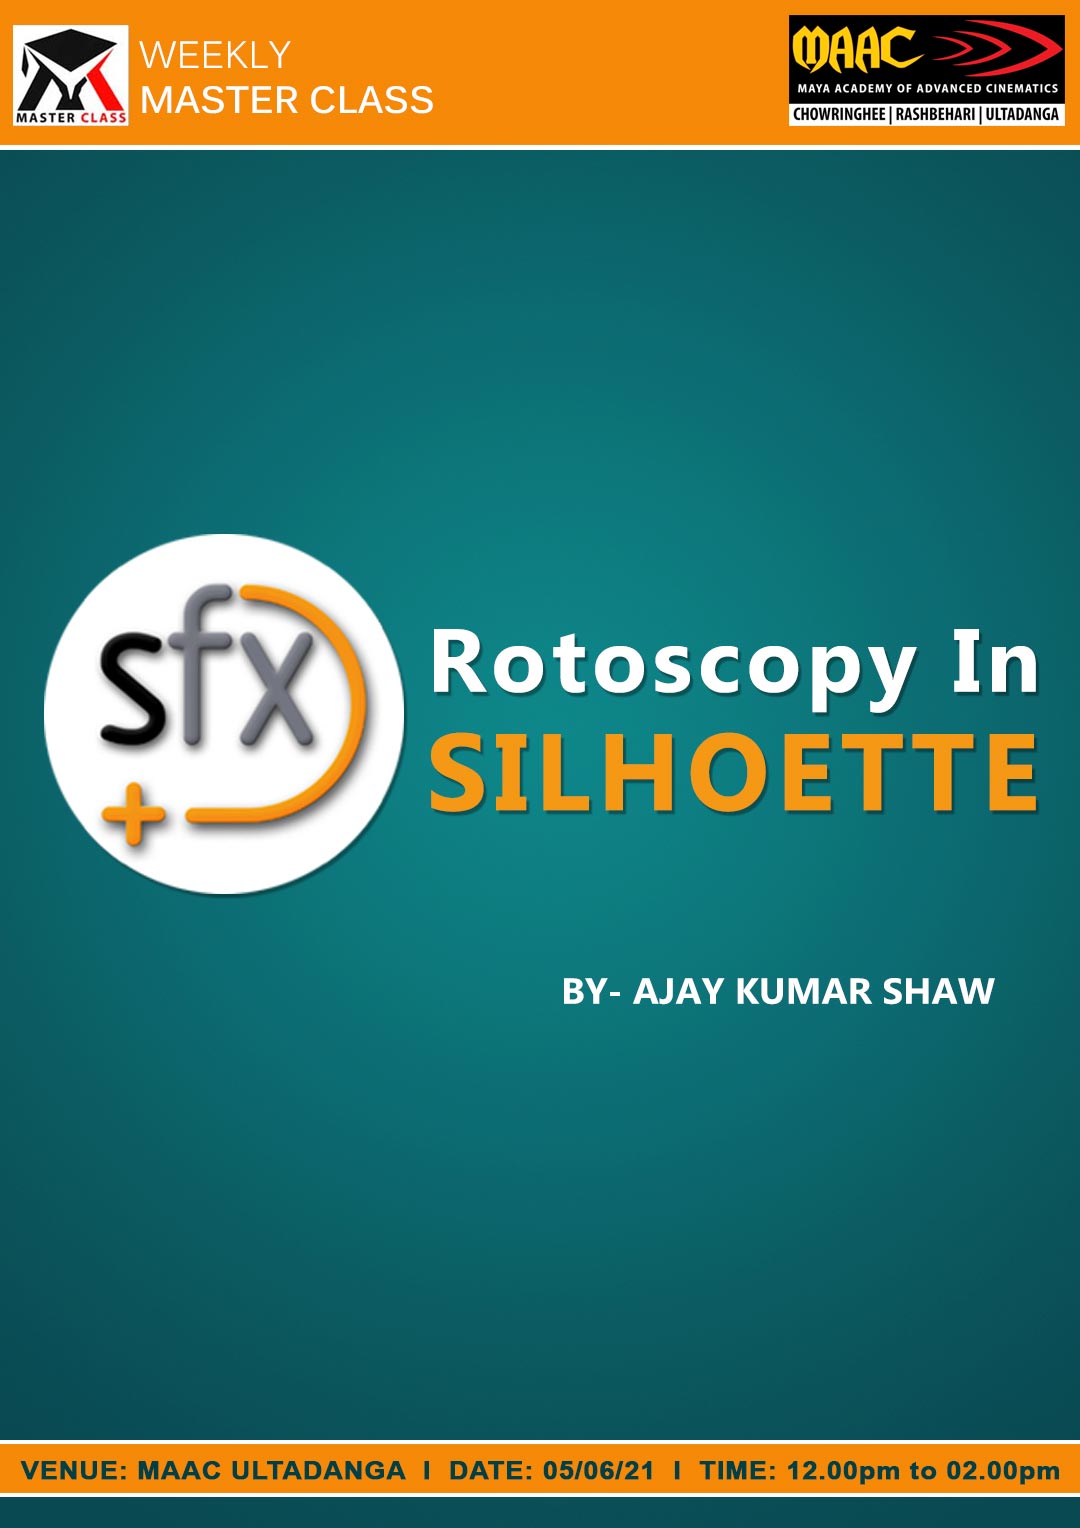 Weekly Master Class on Rotoscopy in Silhouette